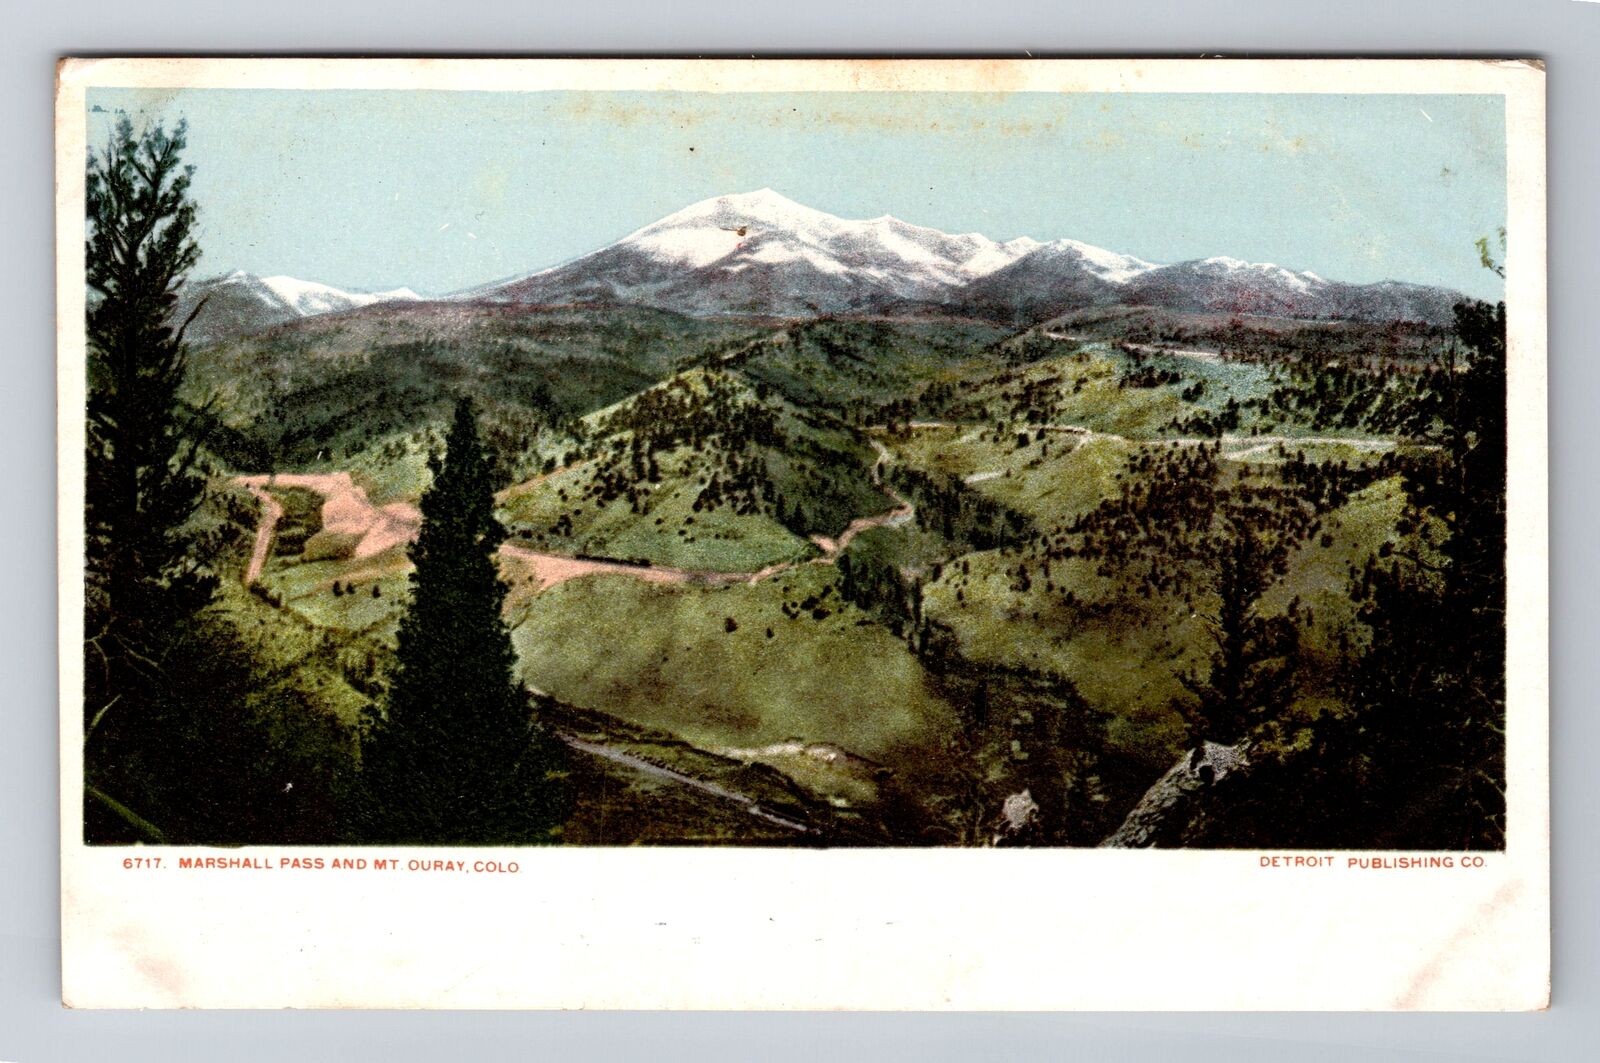 Marshall Pass CO-Colorado, Scenic View Of Mt. Ouray, Antique Vintage Postcard